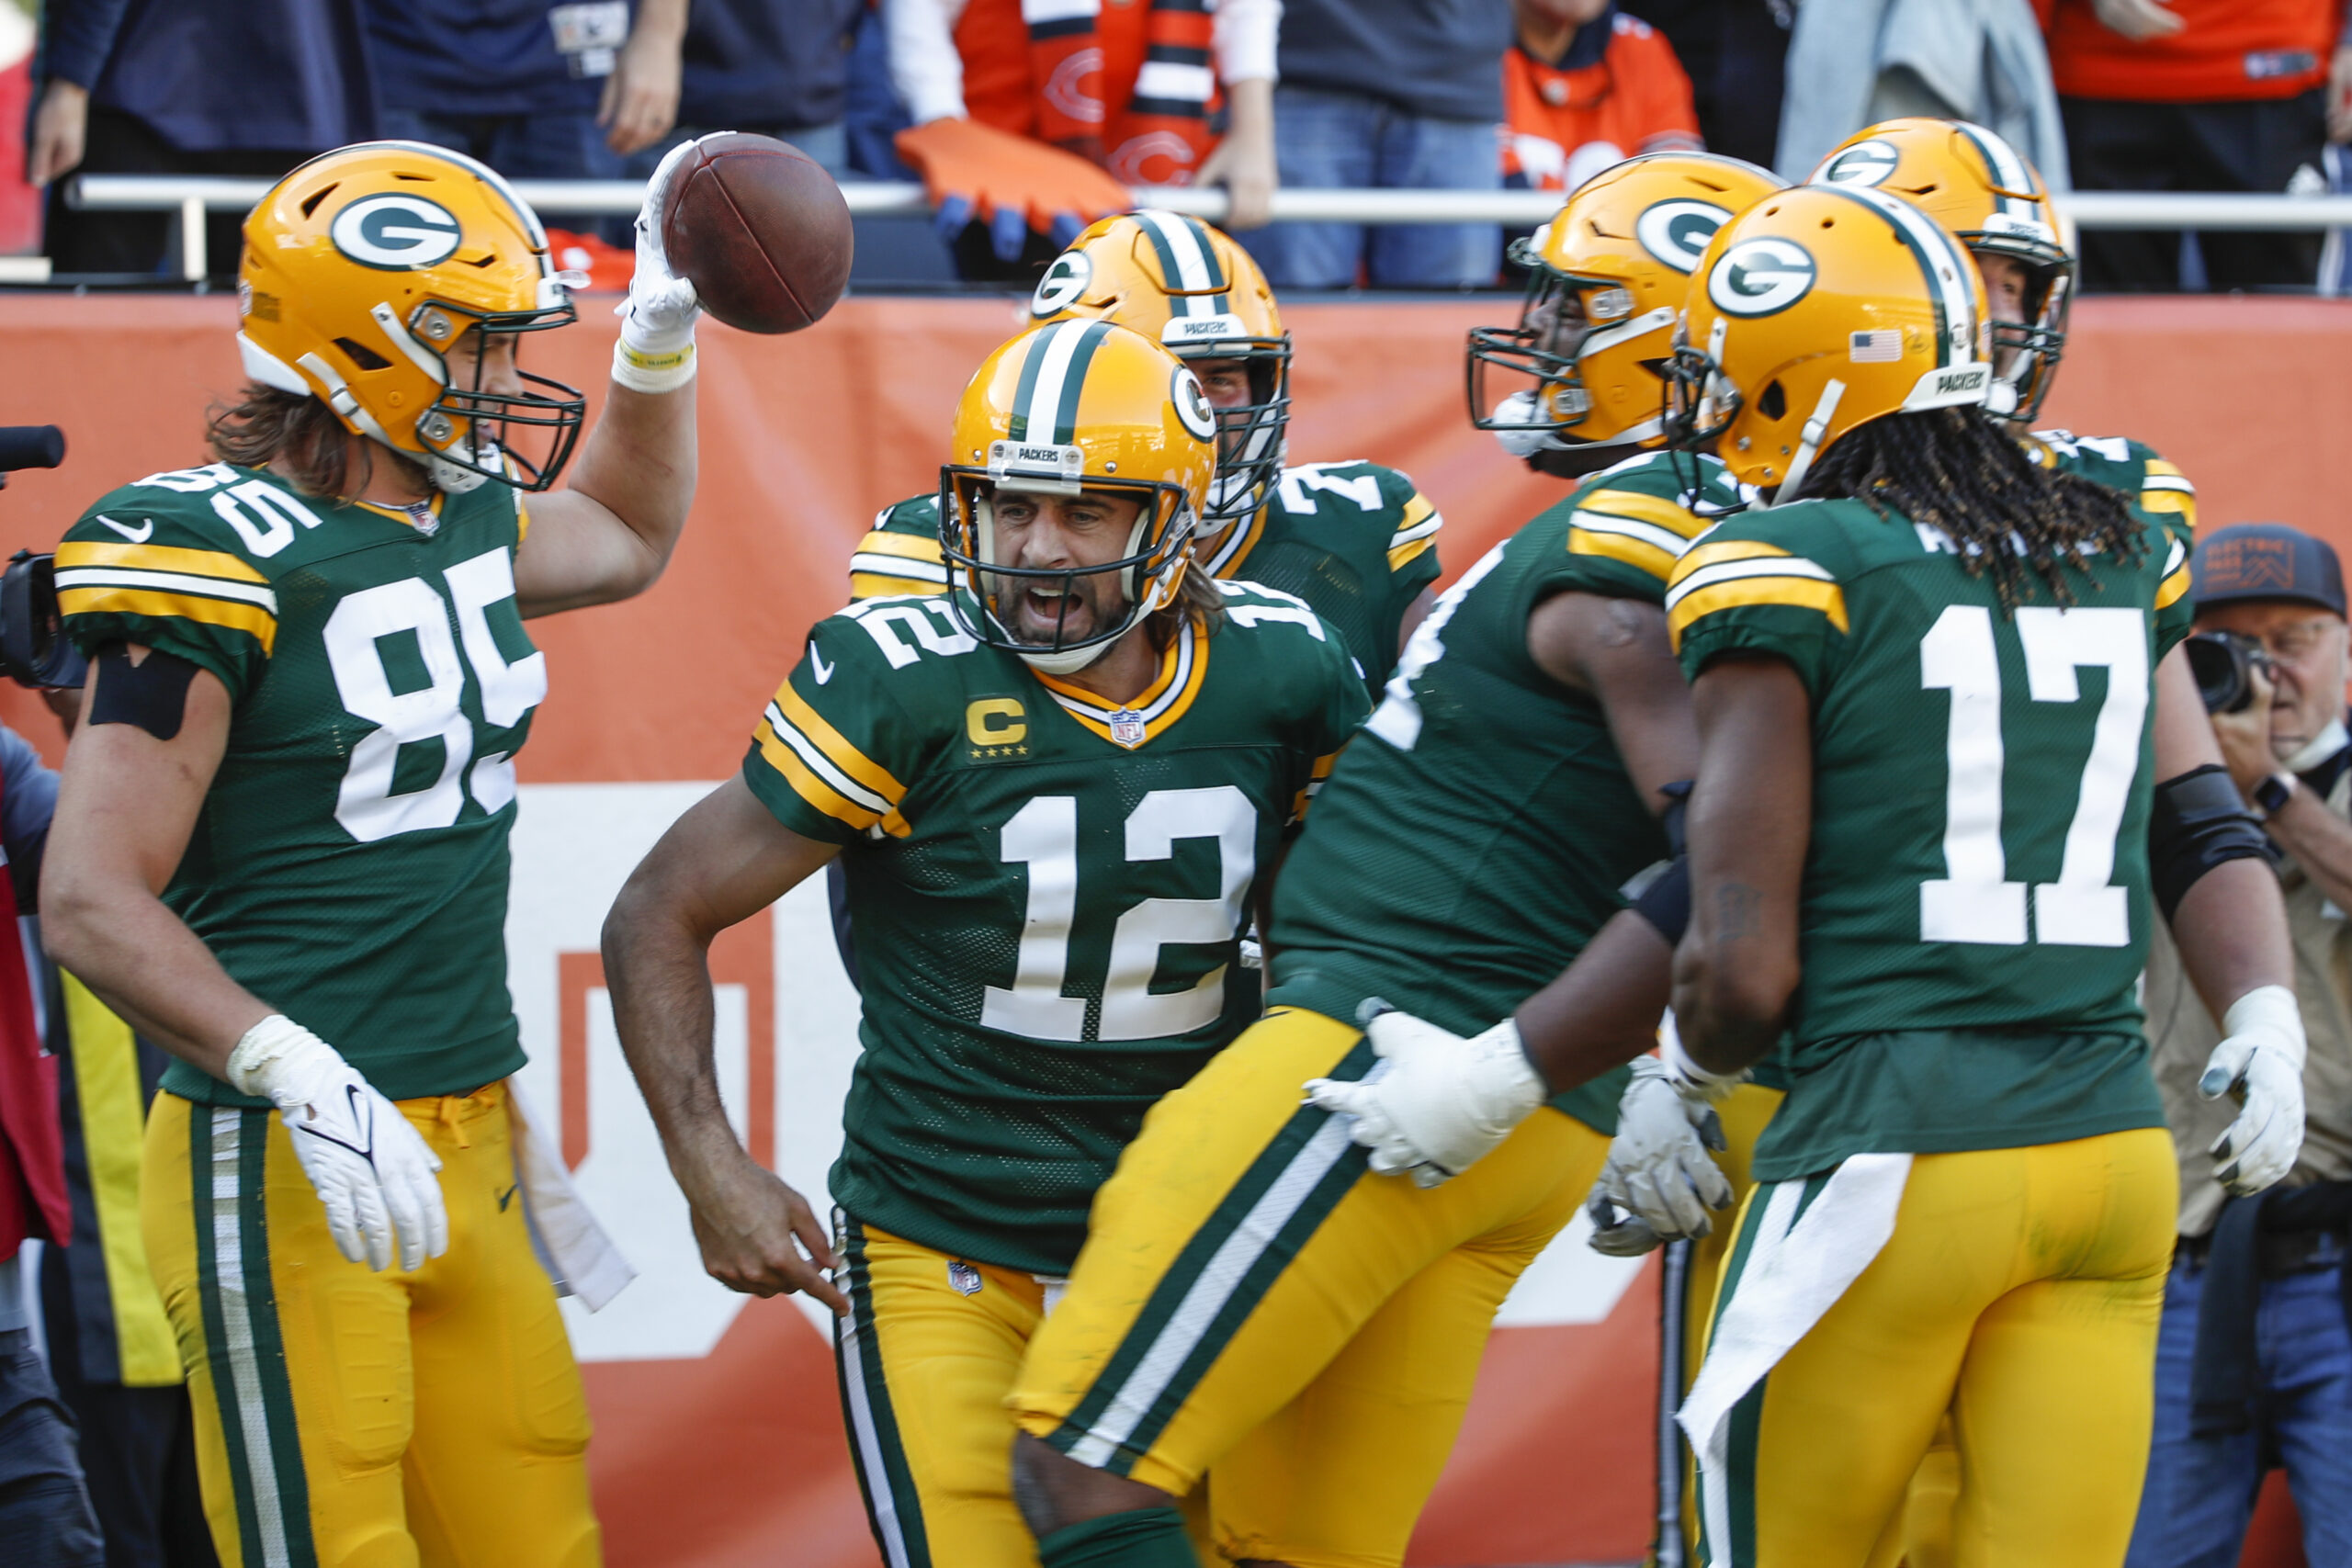 Packers players celebrate touchdown